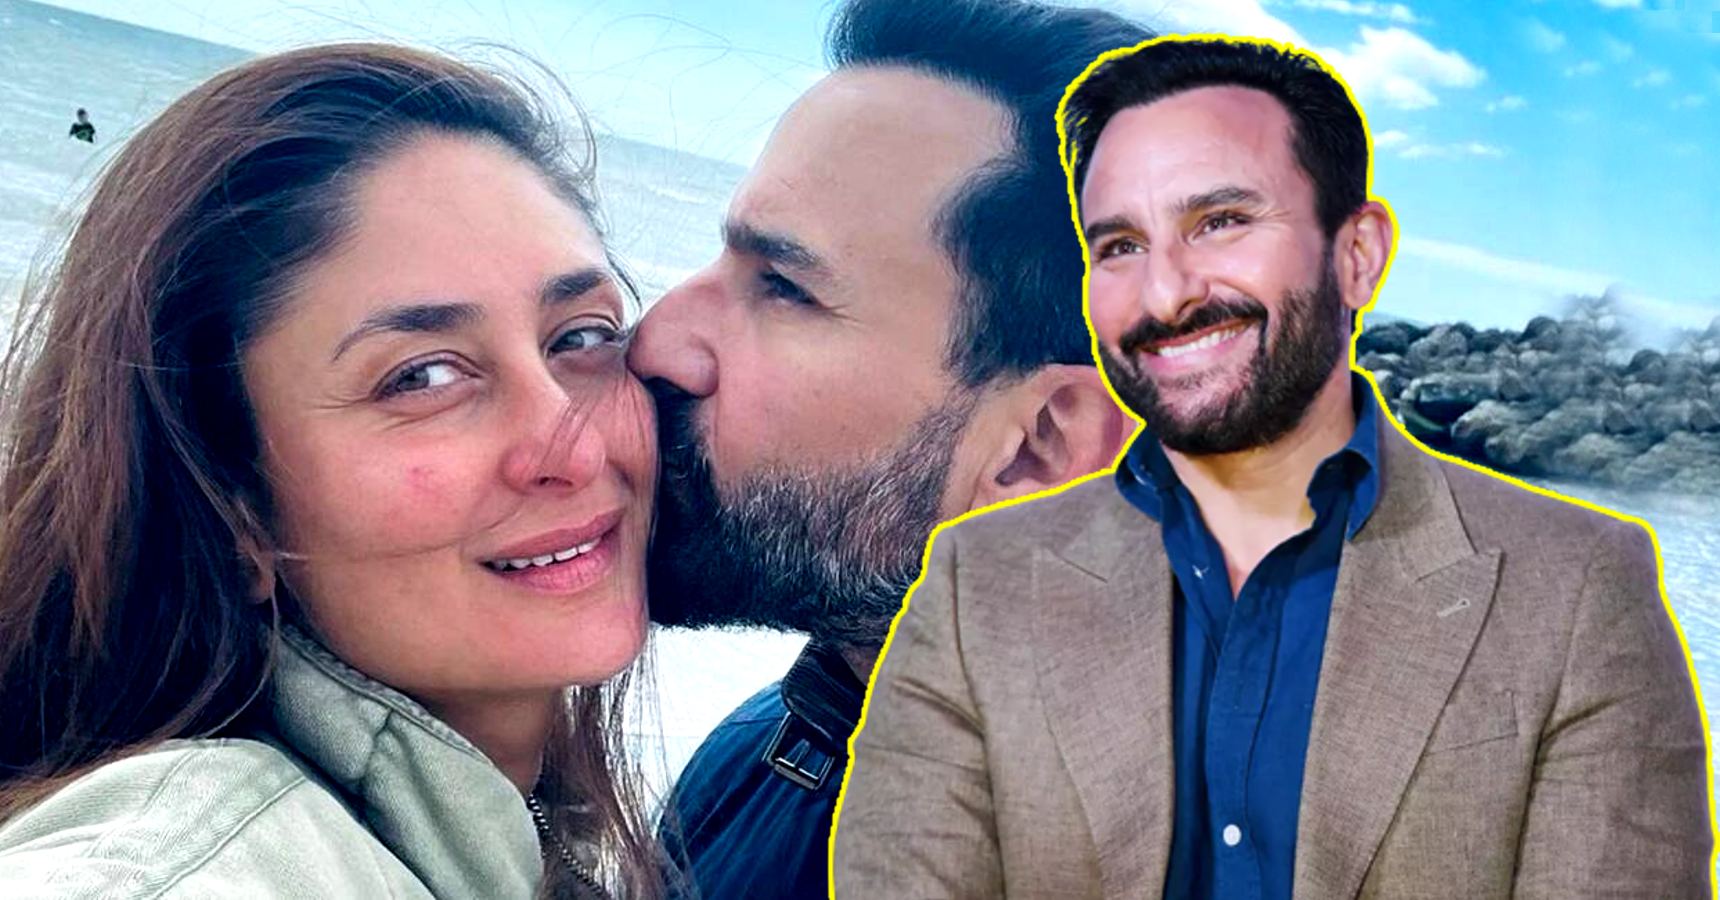 Saif Ali Khan gives tips for happy married life to choose young and beautiful wife